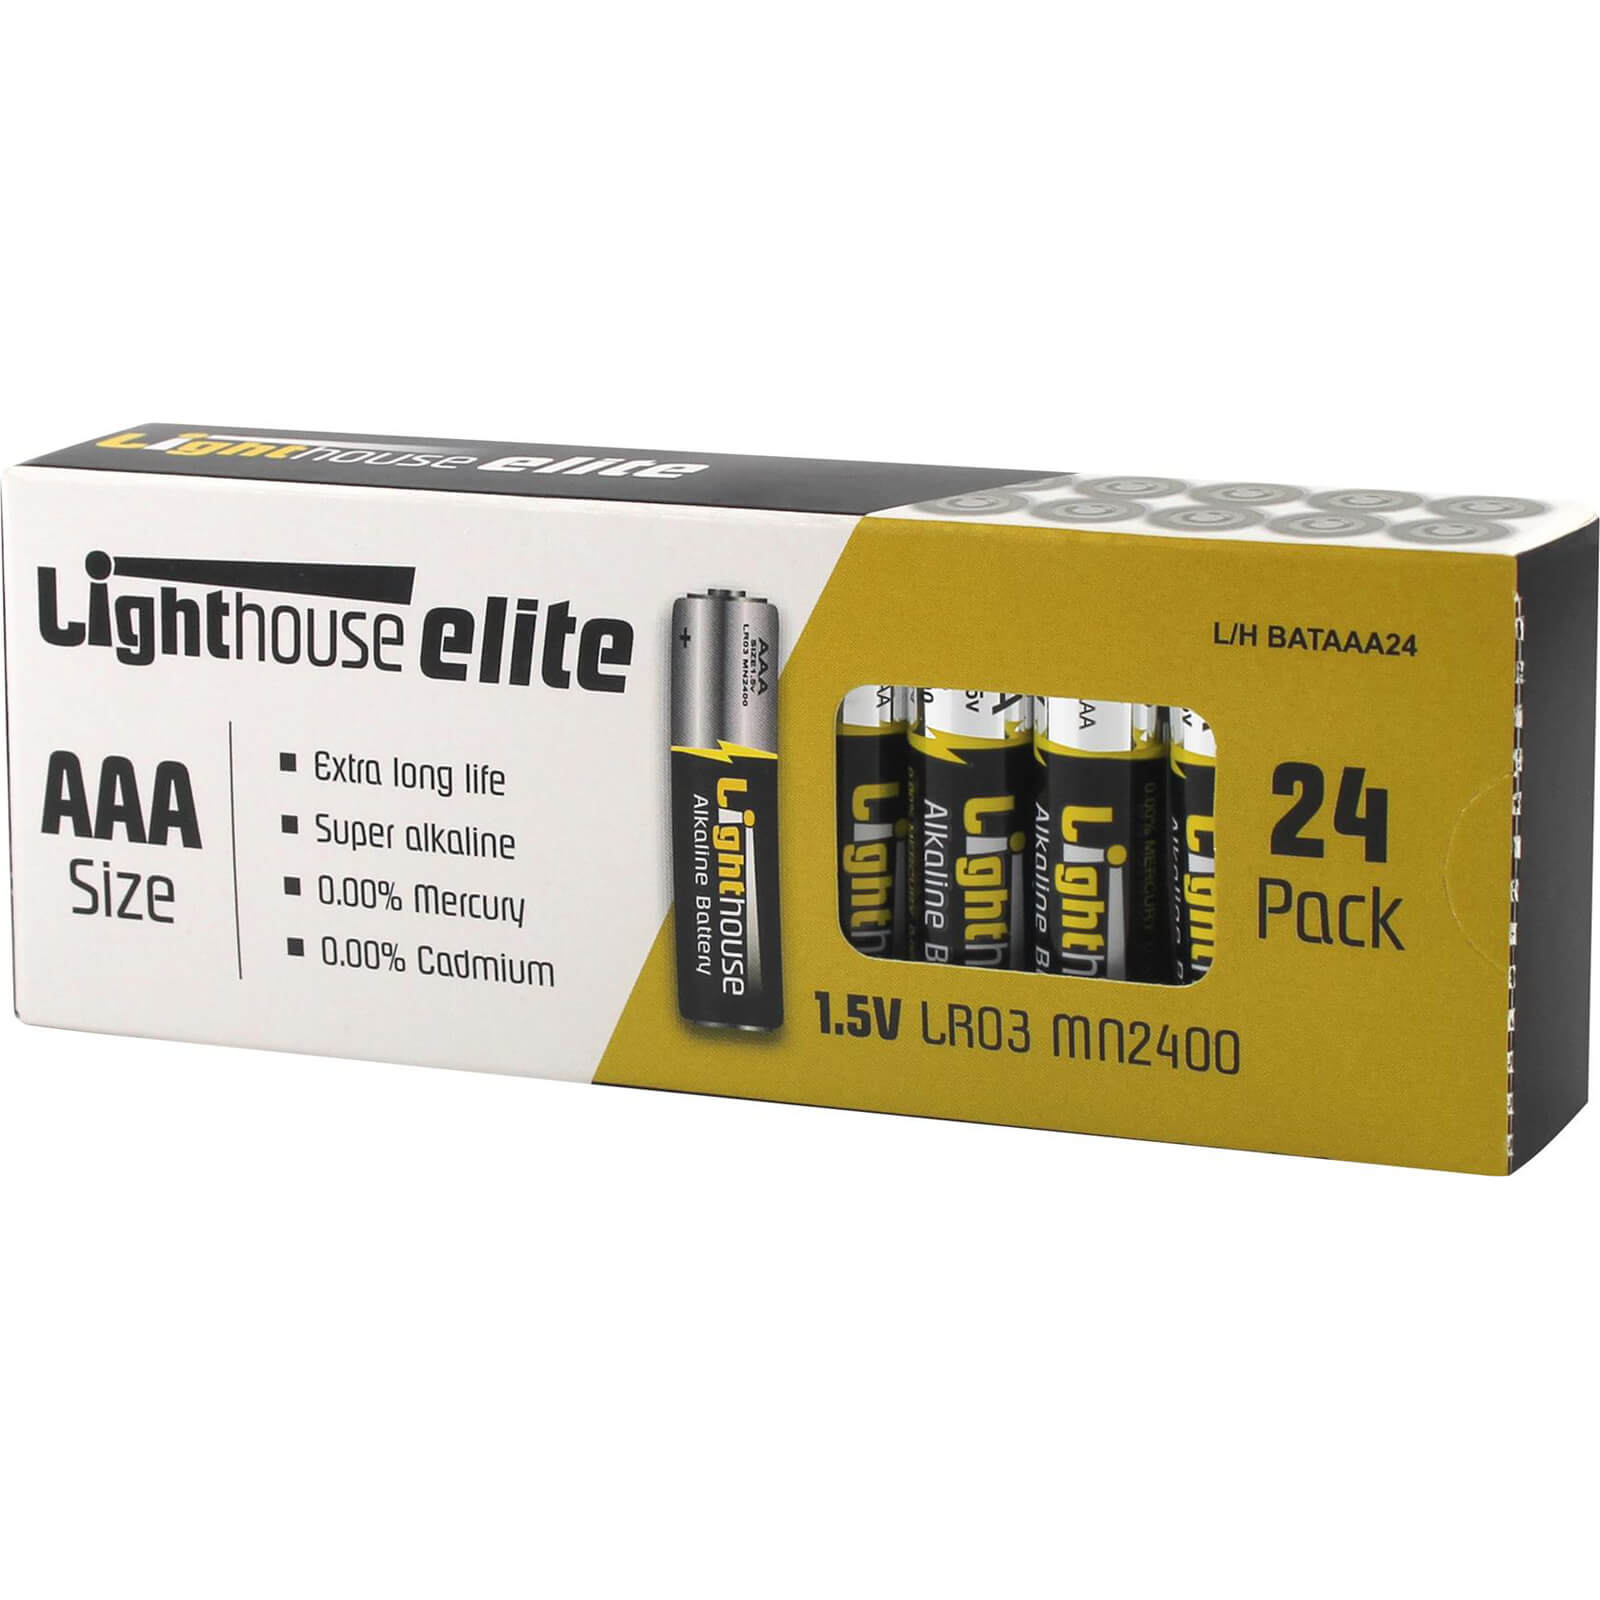 Image of Lighthouse LR03 Extra Long Life AAA Alkaline Batteries Pack of 24